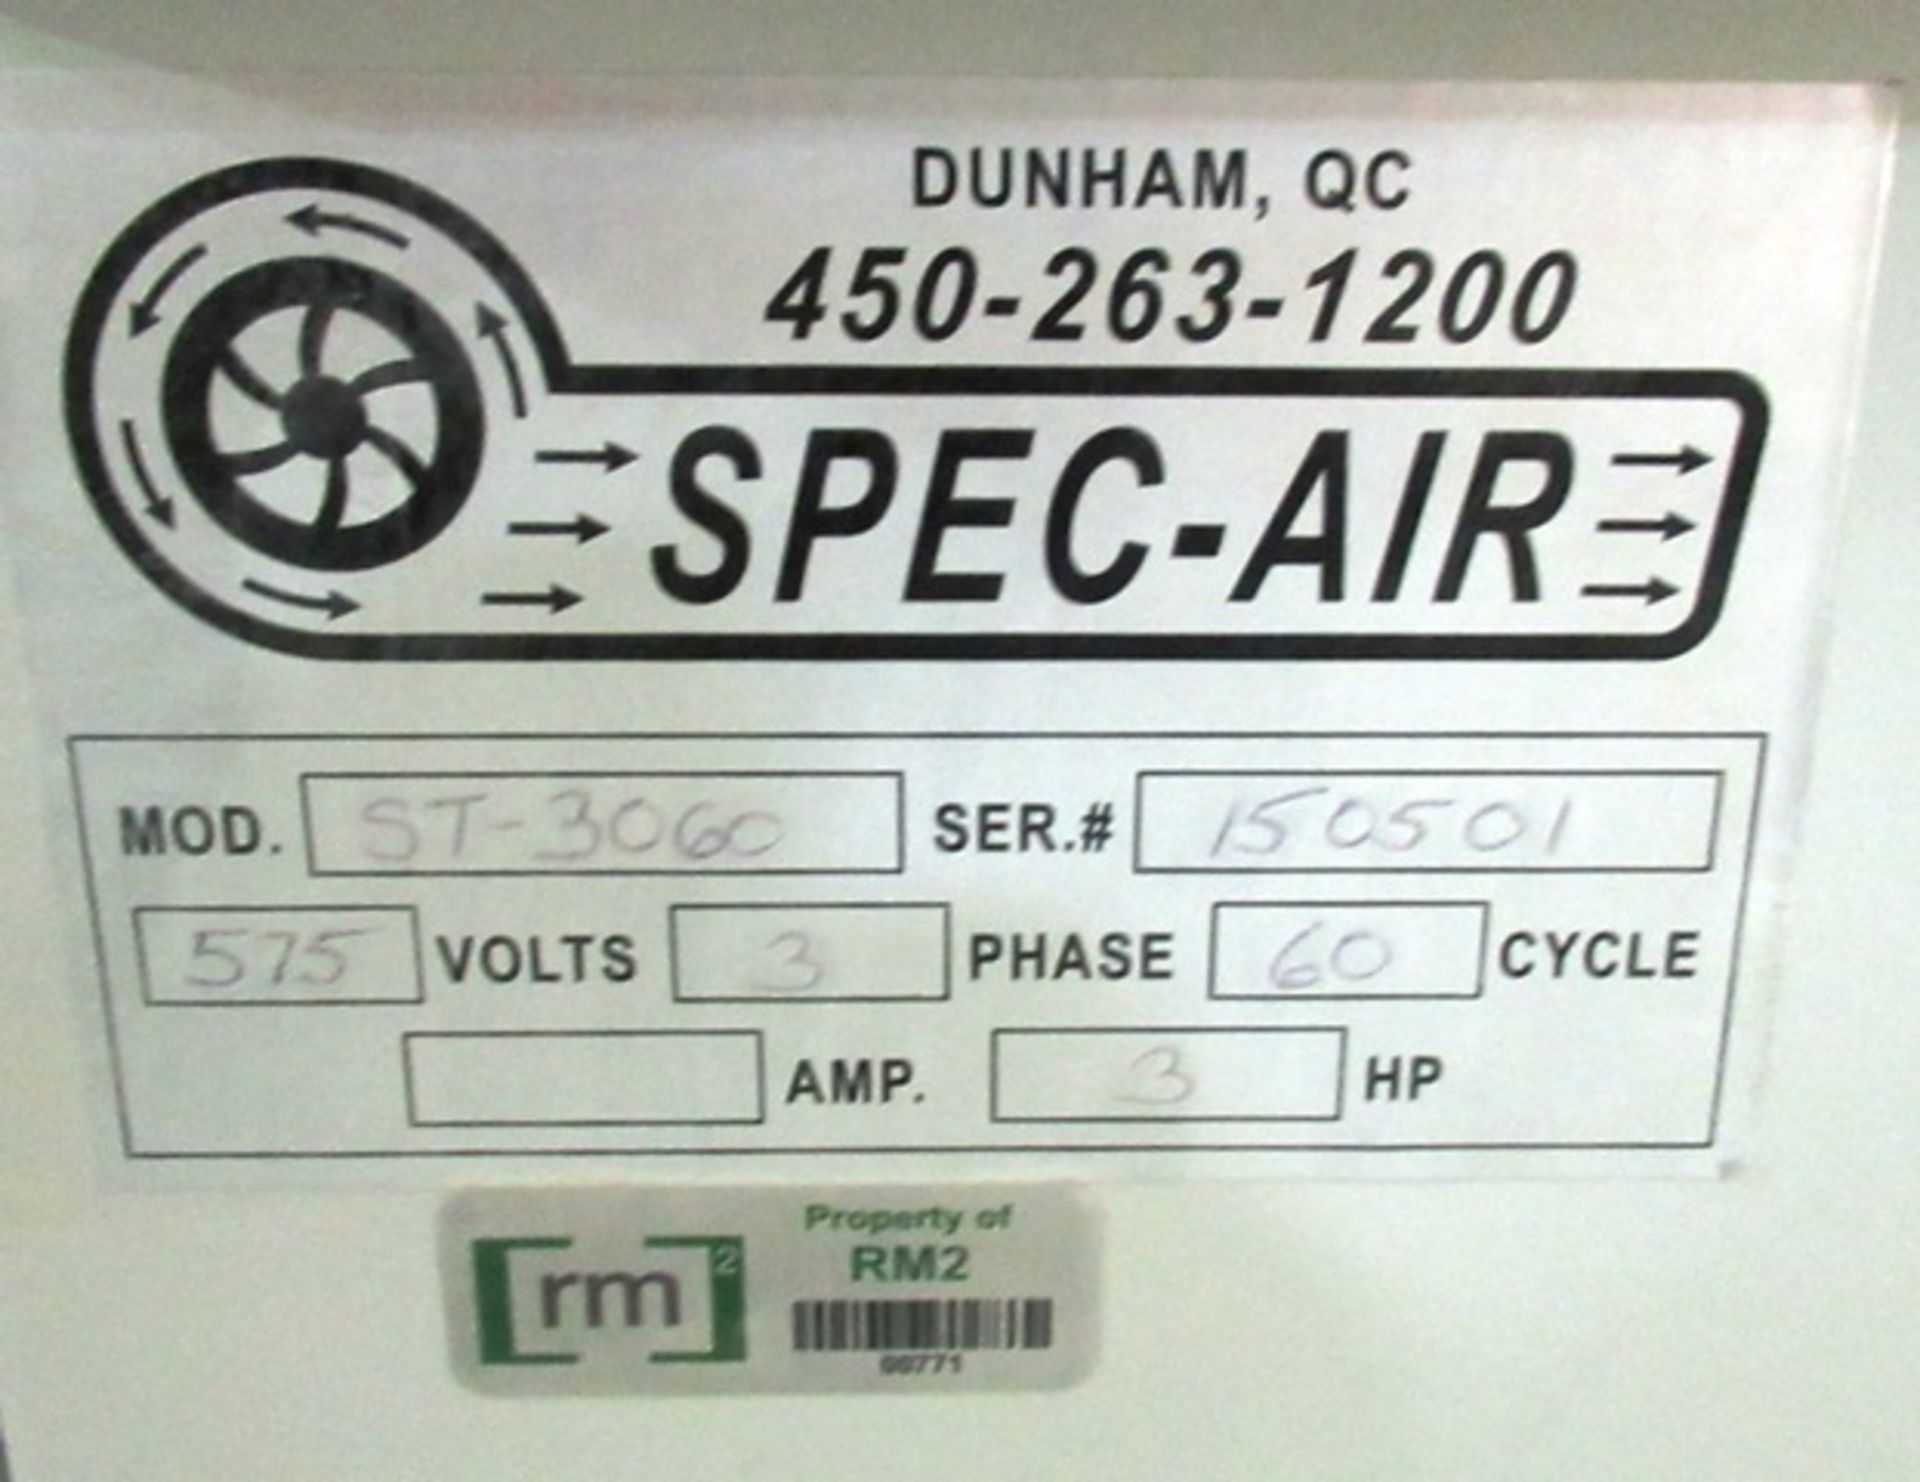 SPEC-AIR MODEL ST 3060 DOWN DRAFT TABLE, 3/60/575V, 3HP, S/N 150501 - Image 3 of 3